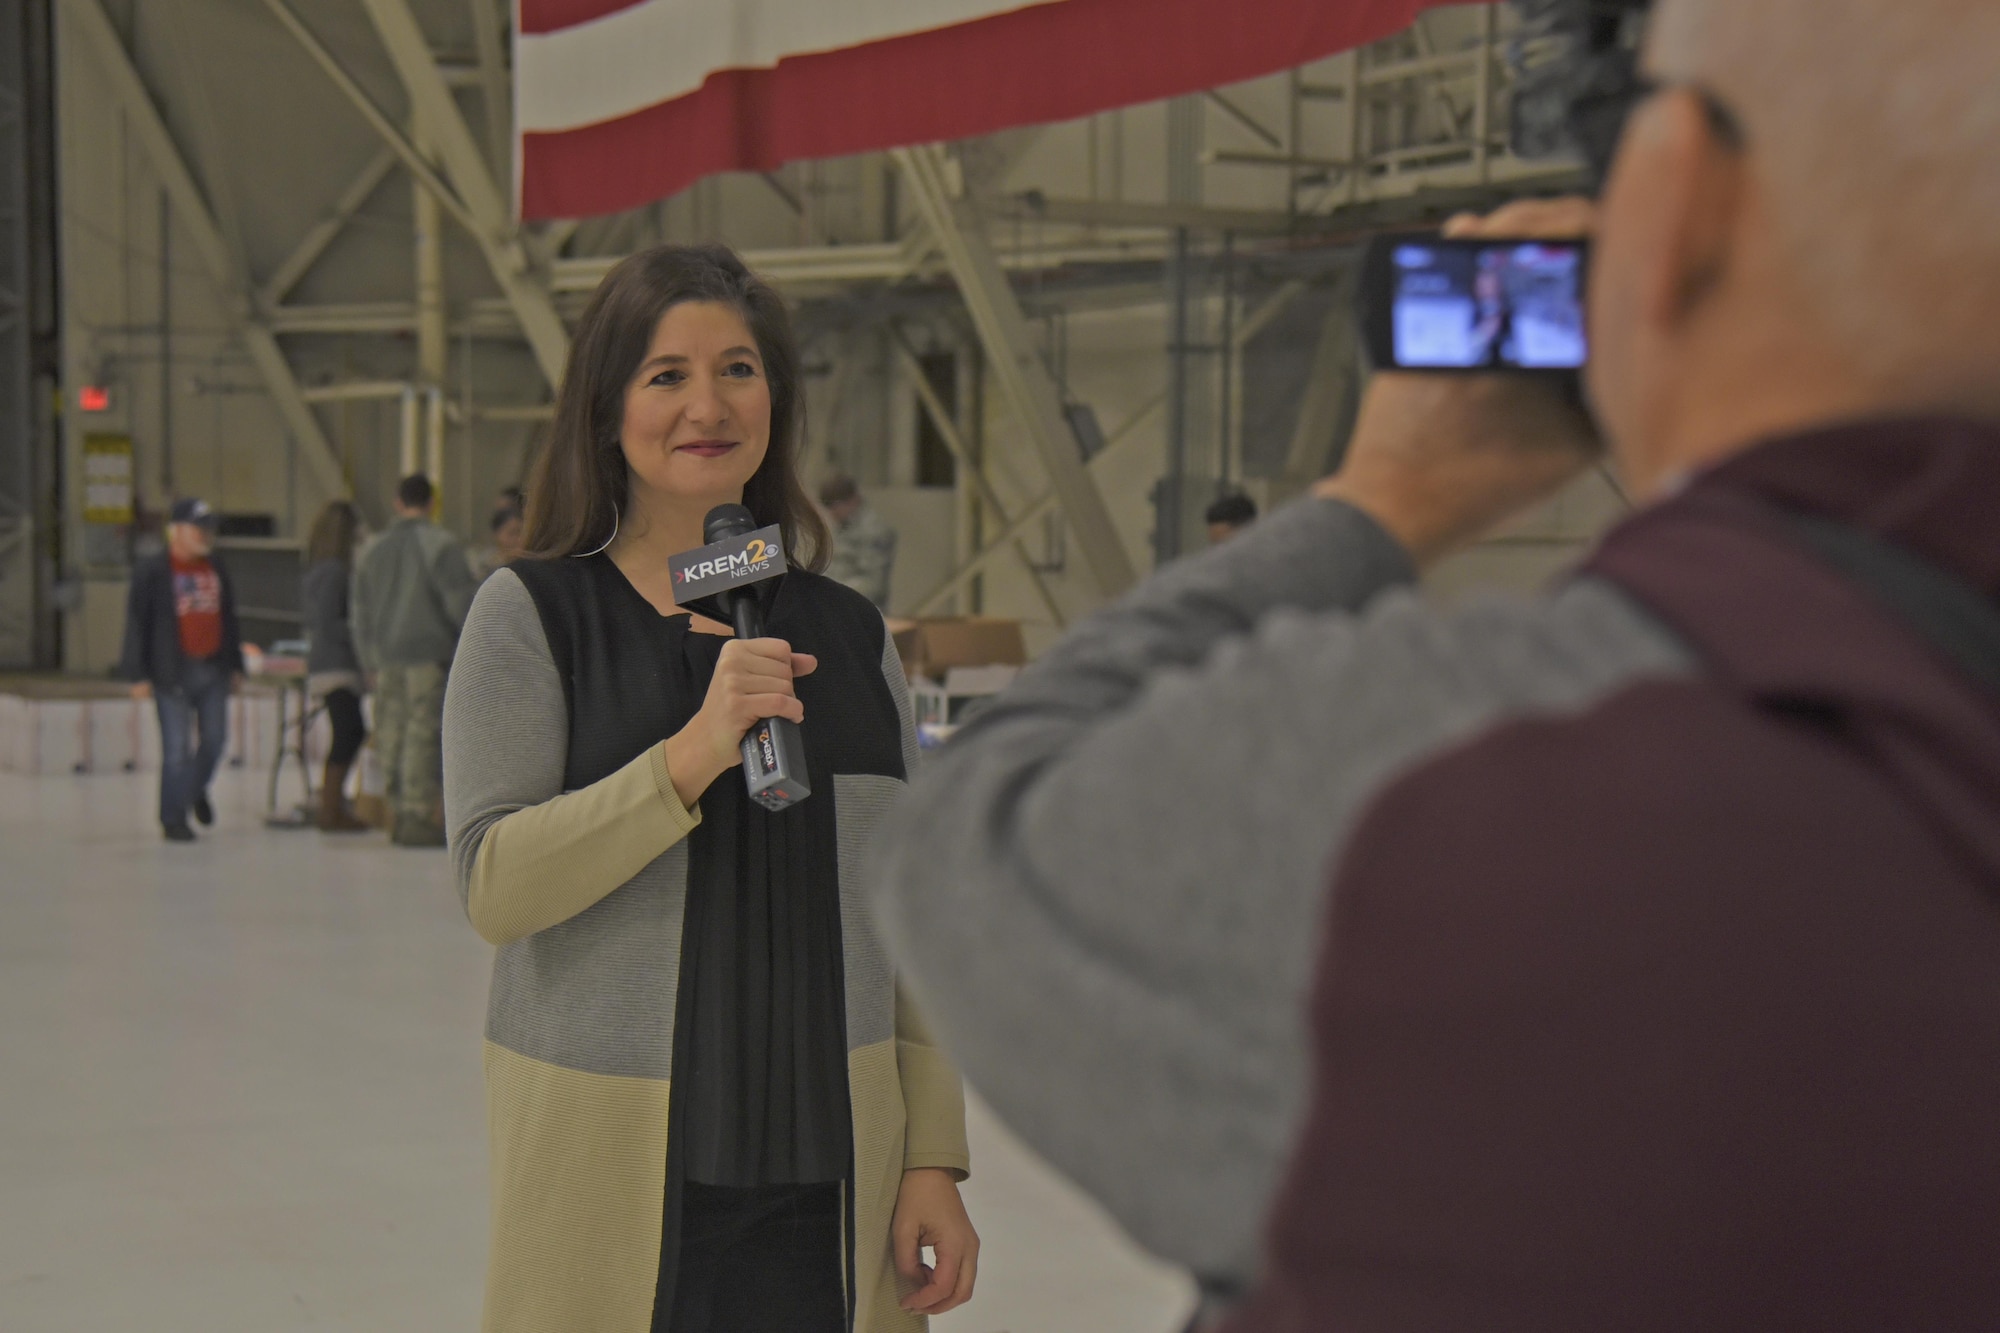 Laura Papetti, KREM 2 News anchor, does a live broadcast of the Treats 2 Troops effort Nov. 29, 2017, at Fairchild Air Force Base, Washington. Treats 2 Troops contributions are not only distributed to Air Force members from Fairchild; our sister services, including the Army, Navy and Marines, also receive packages from the Inland Northwest community.  (U.S. Air Force photo/Senior Airman Mackenzie Richardson)